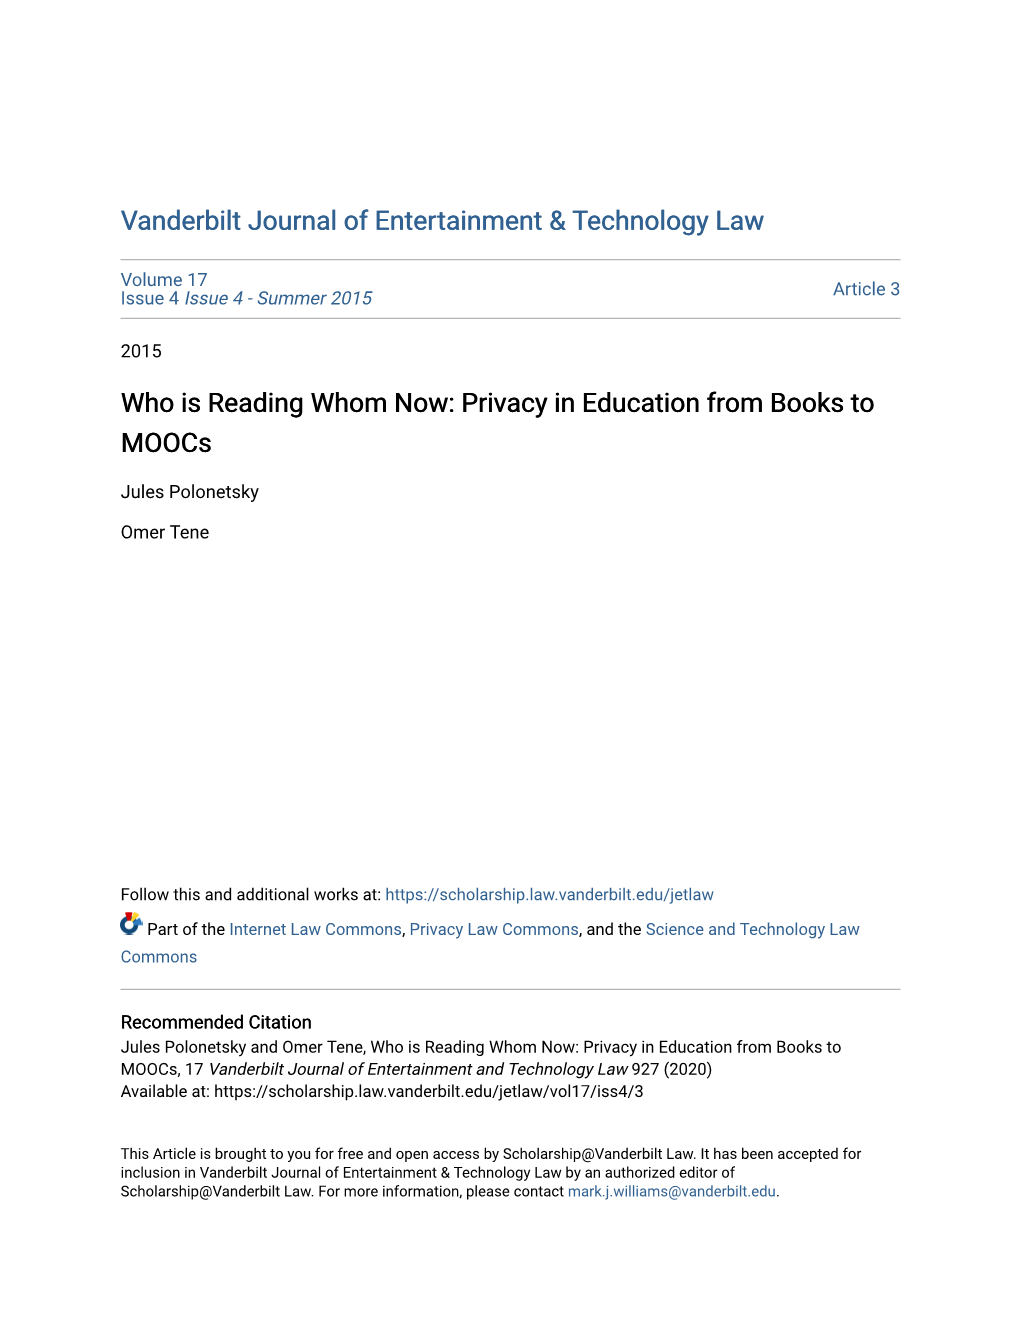 Privacy in Education from Books to Moocs